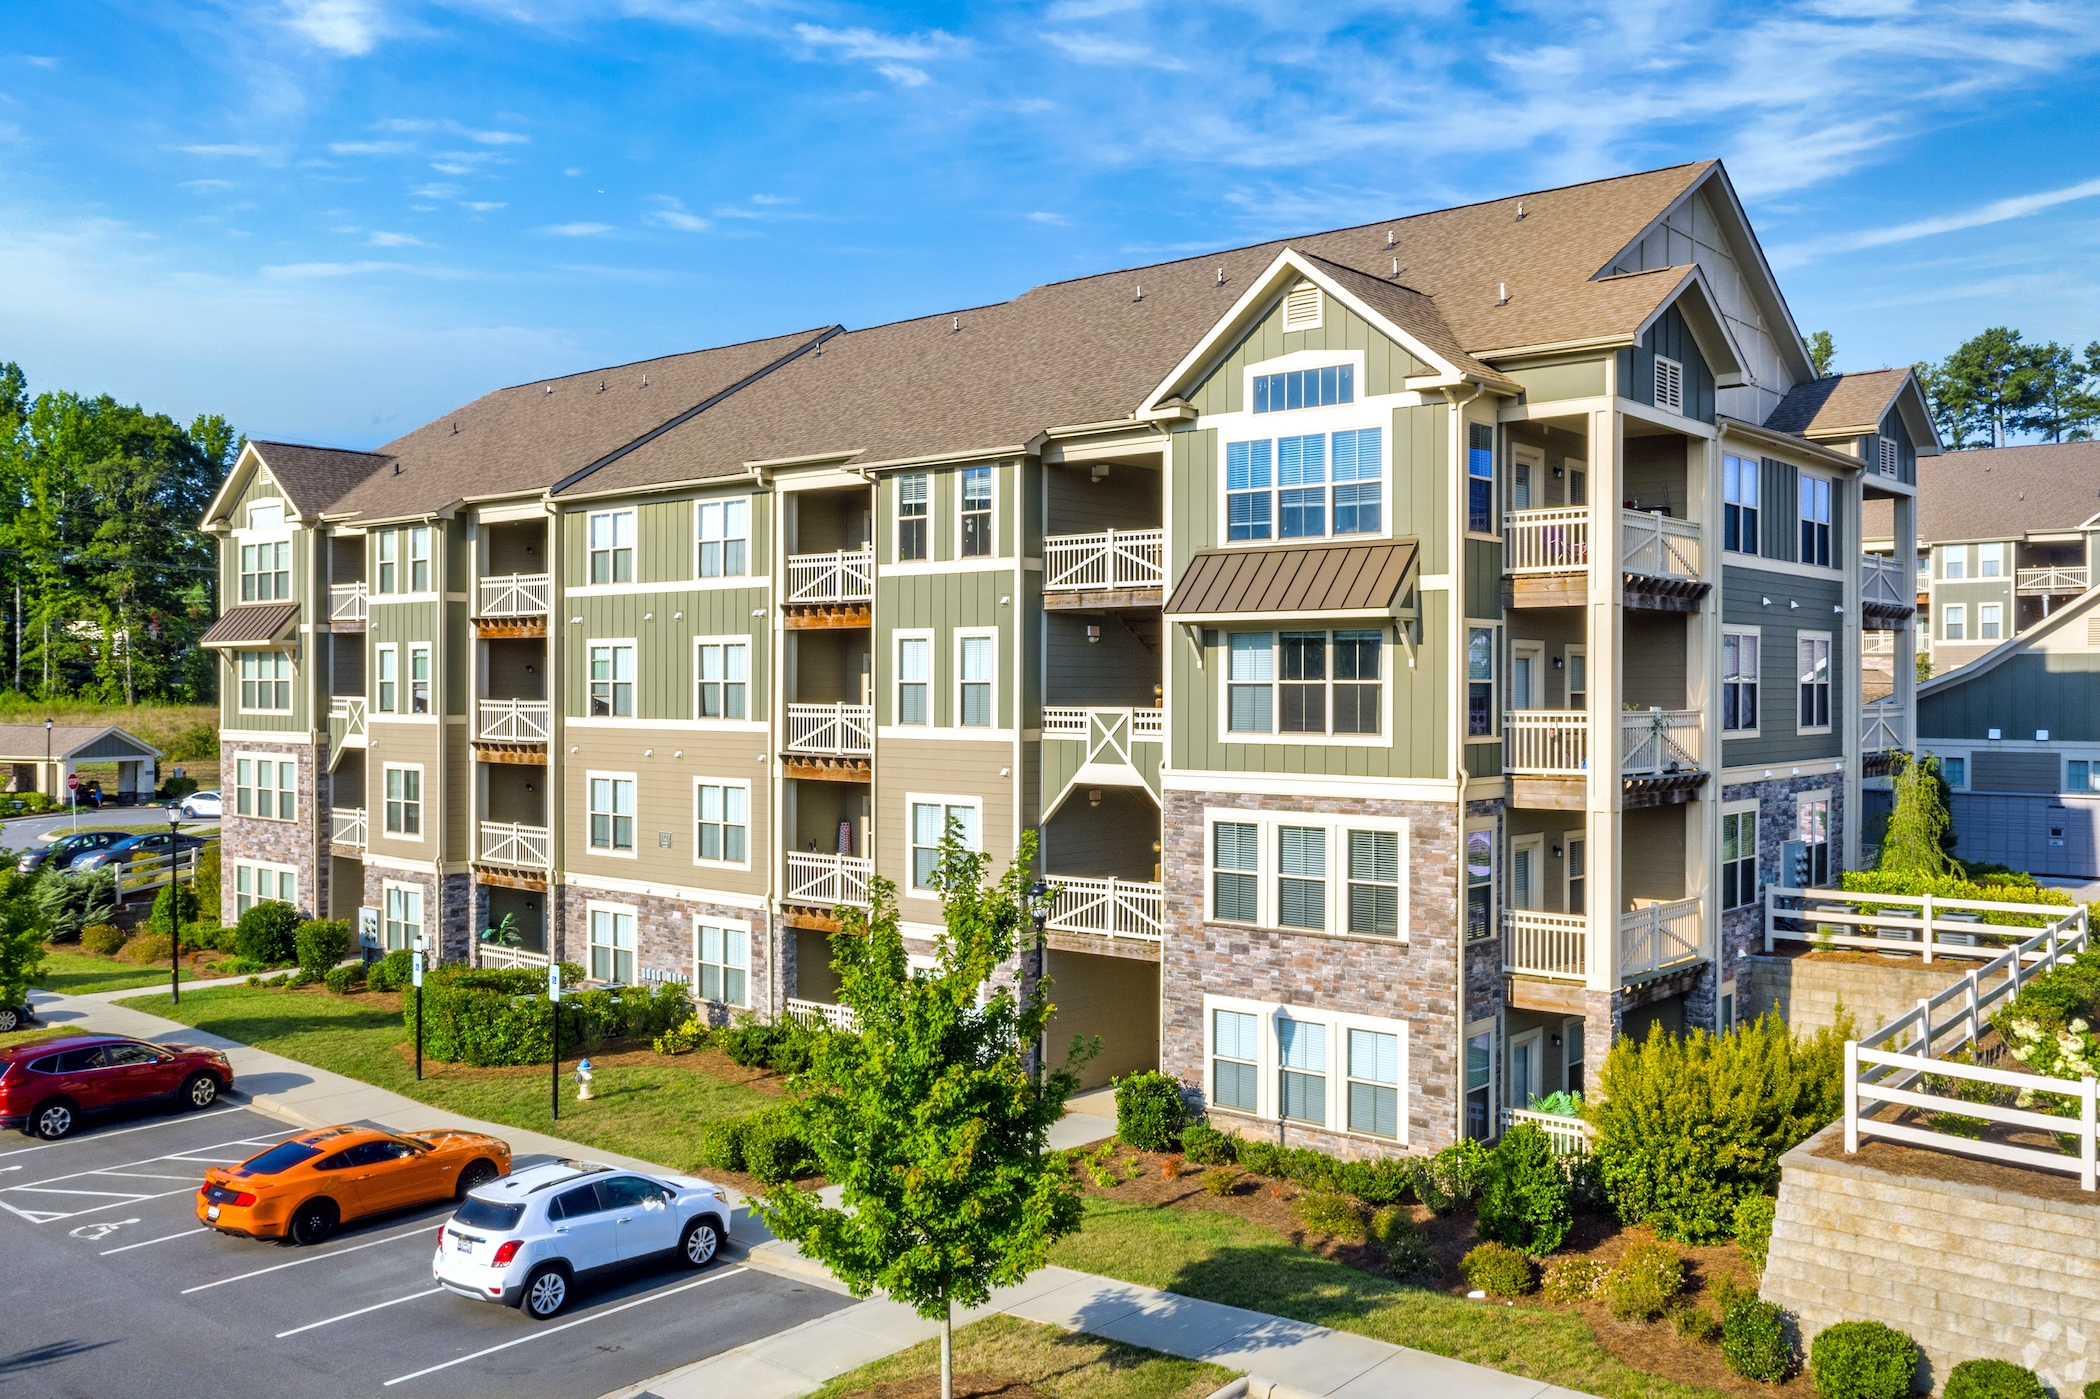 Dallas investor Knightvest Capital bought the Apartments at Brayden in Fort Mill, South Carolina. (CoStar)